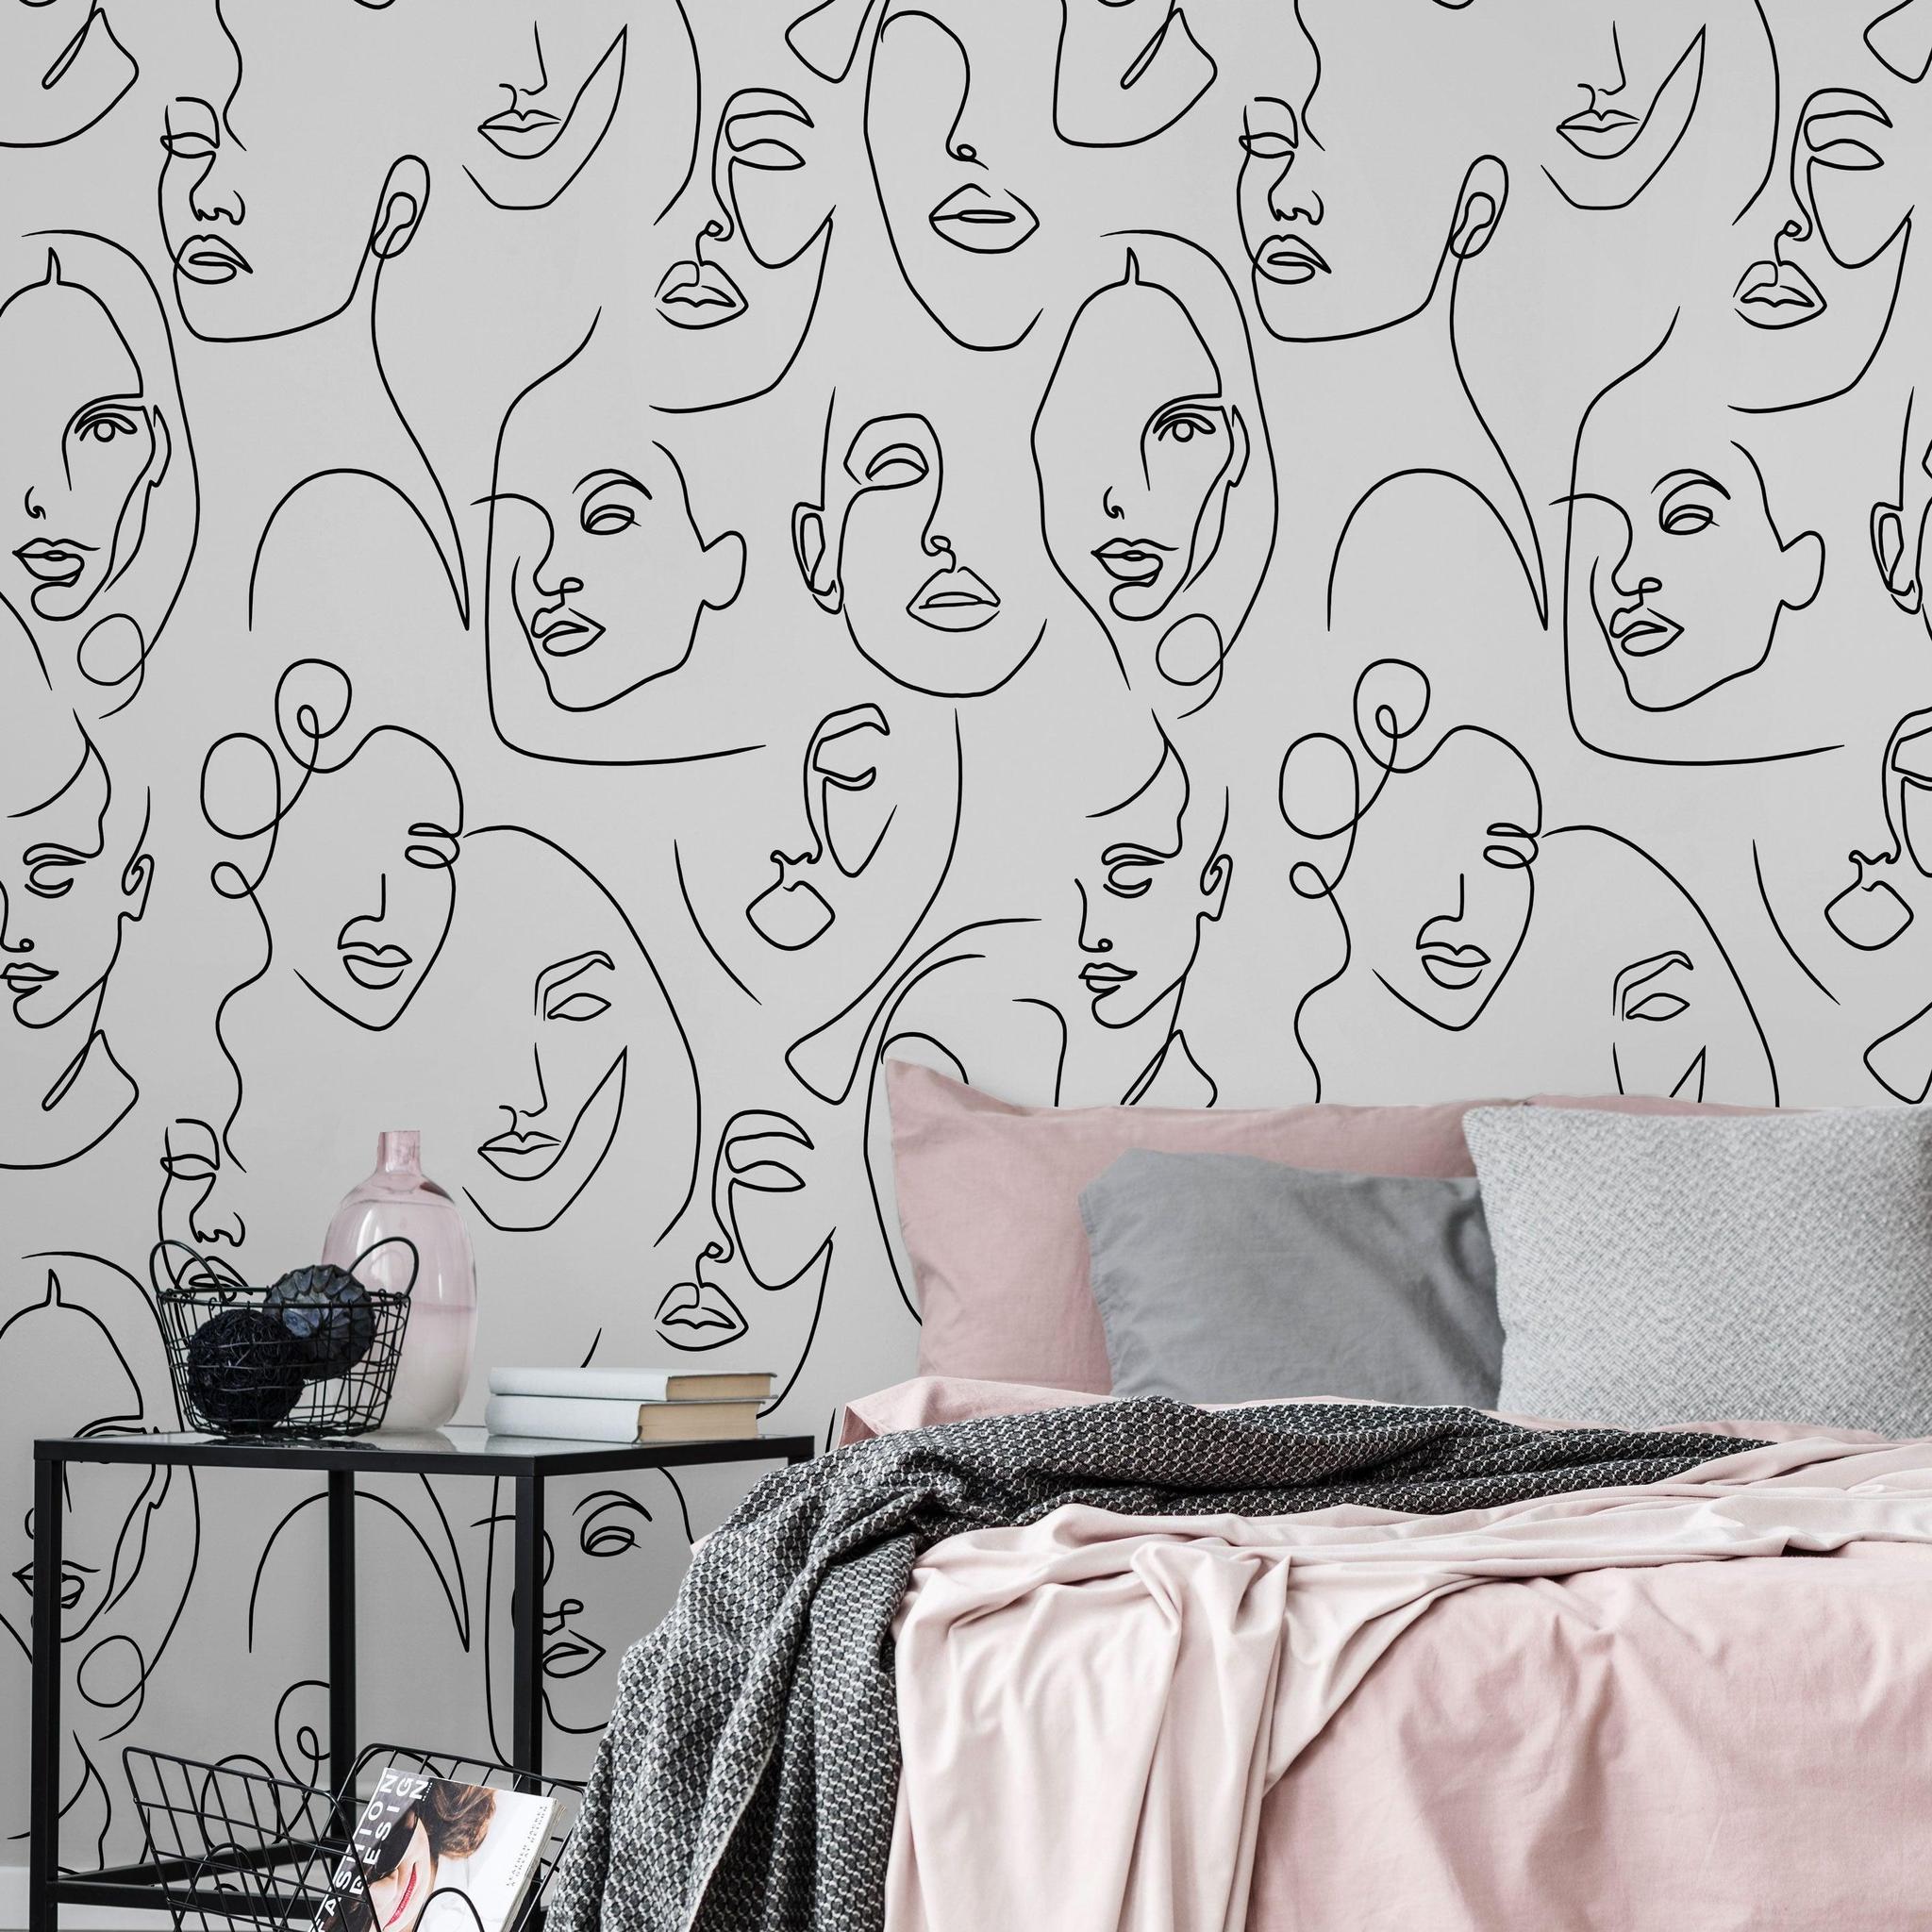 Bella Donna design from Wall Blush AW01 as bedroom wallpaper, with artistic face illustrations.
